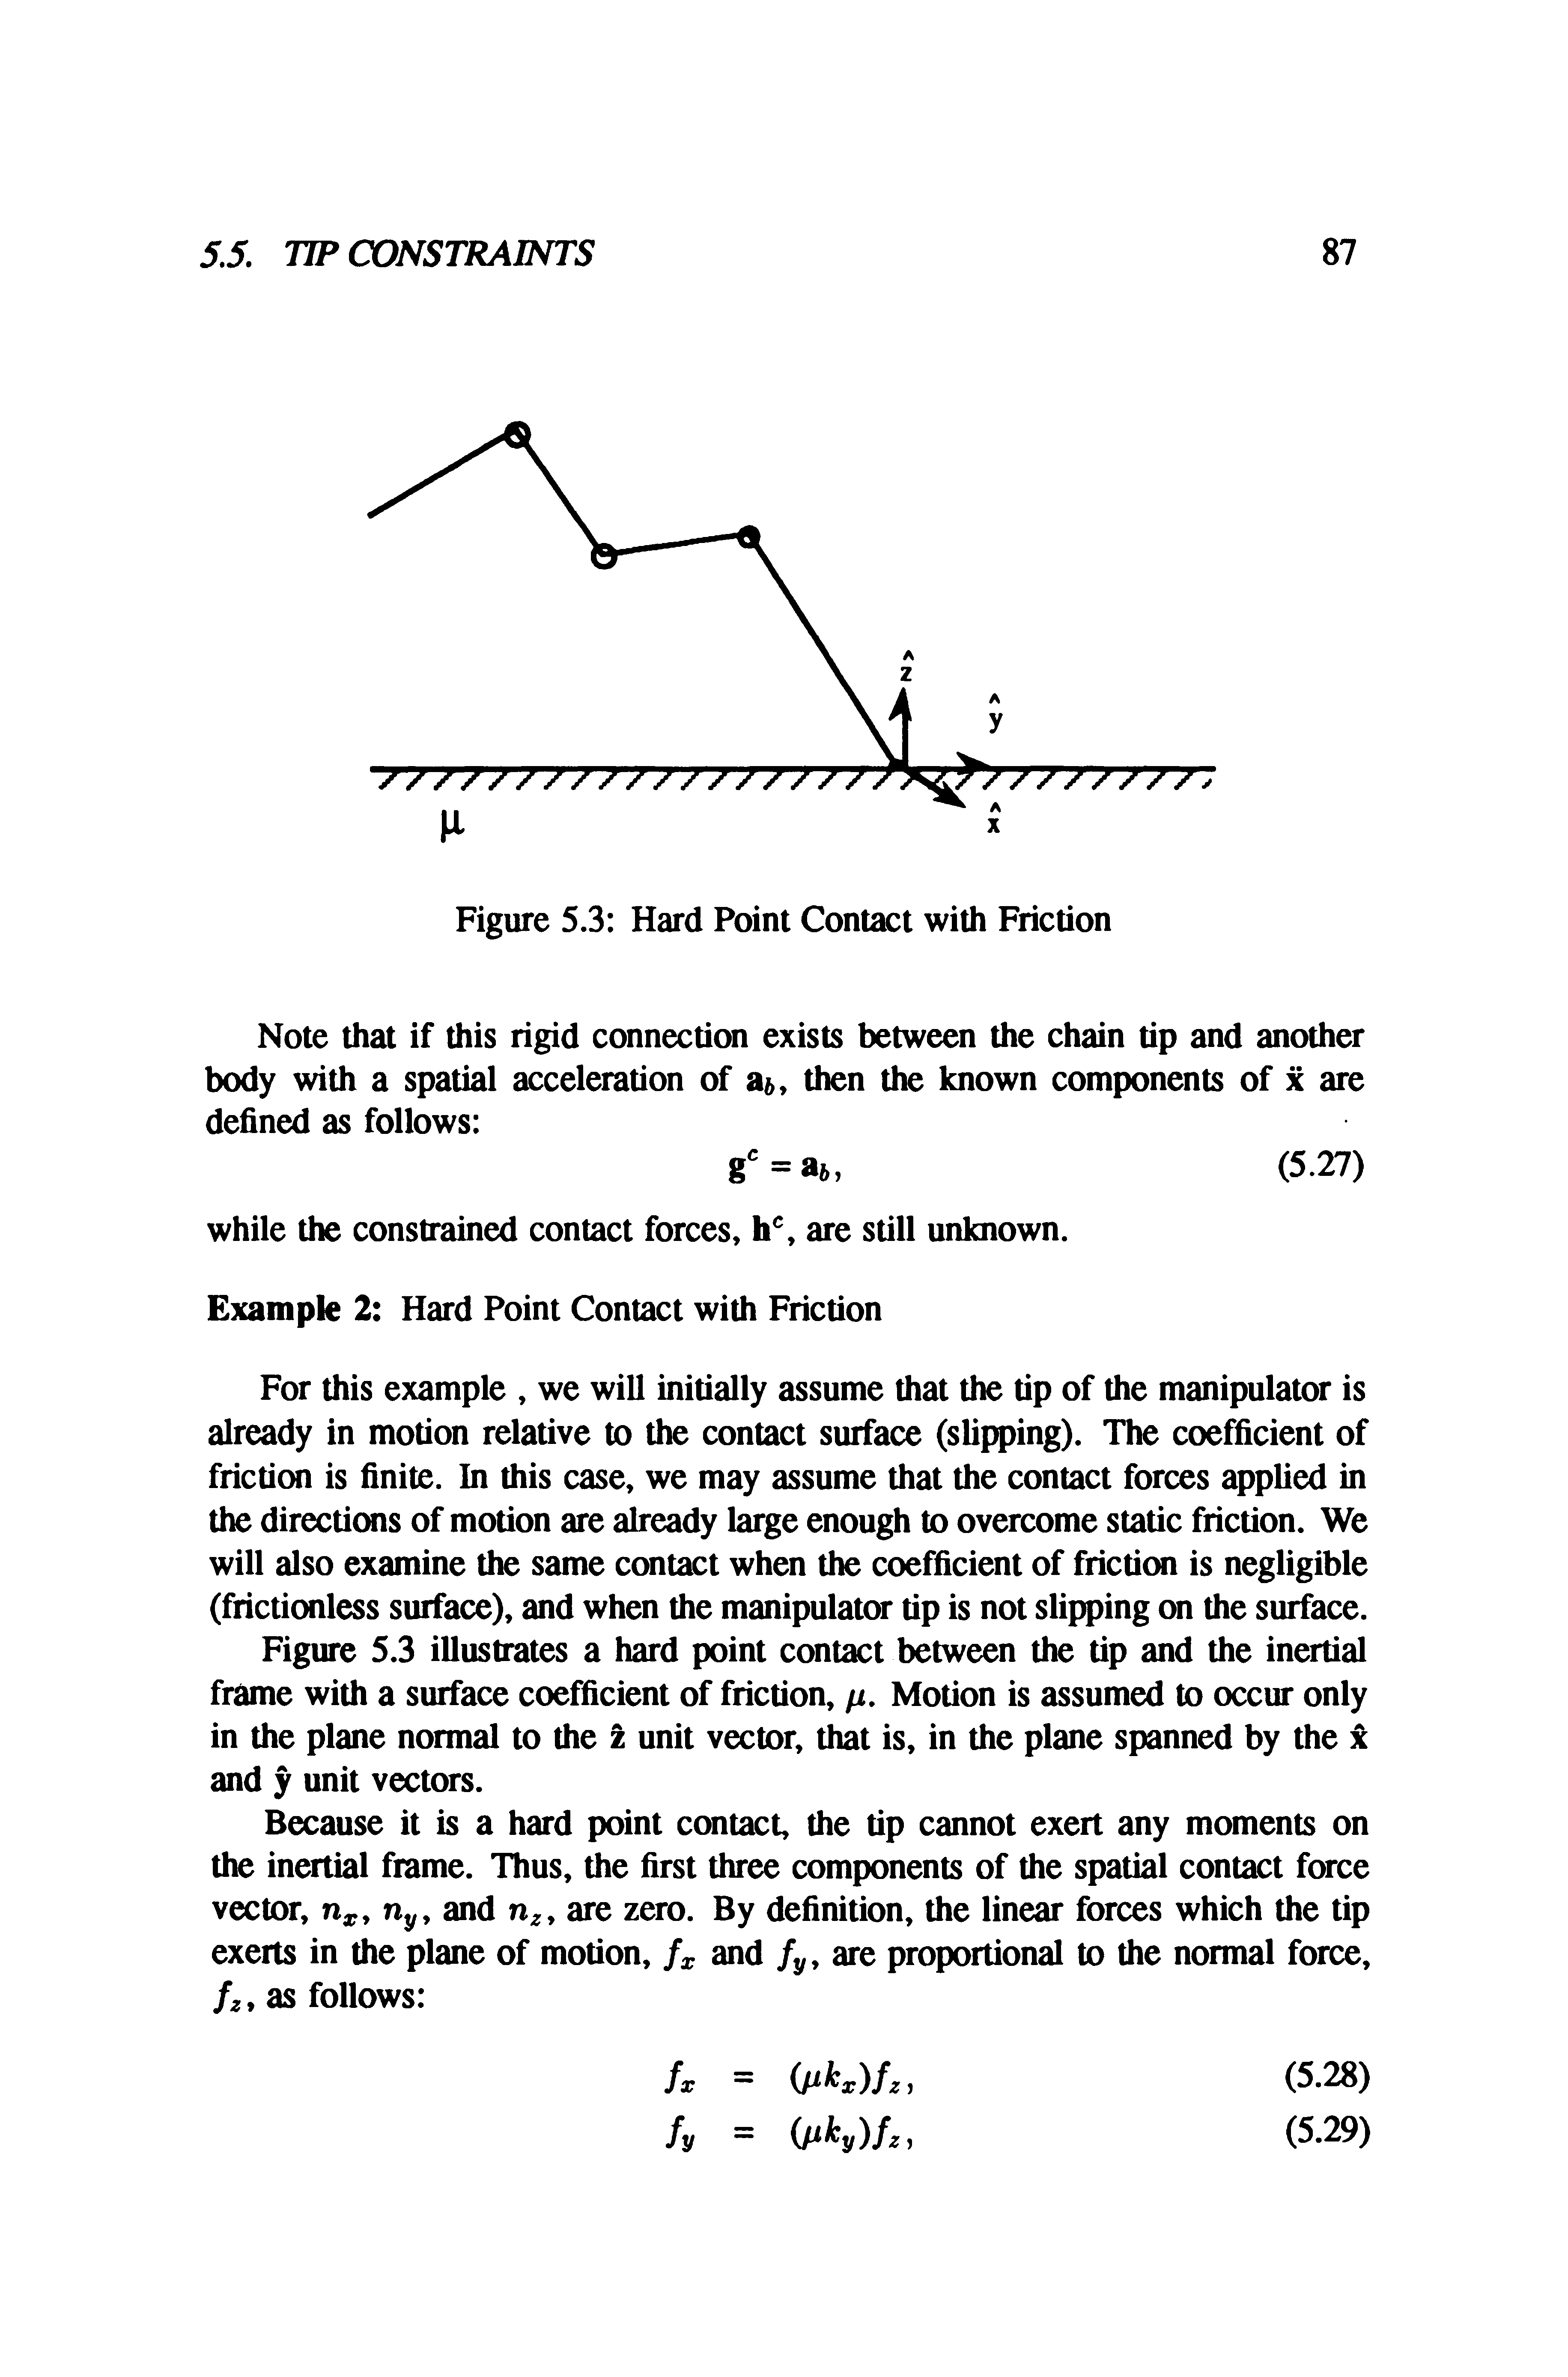 Figure 5.3 Hard Point Contact with Friction...